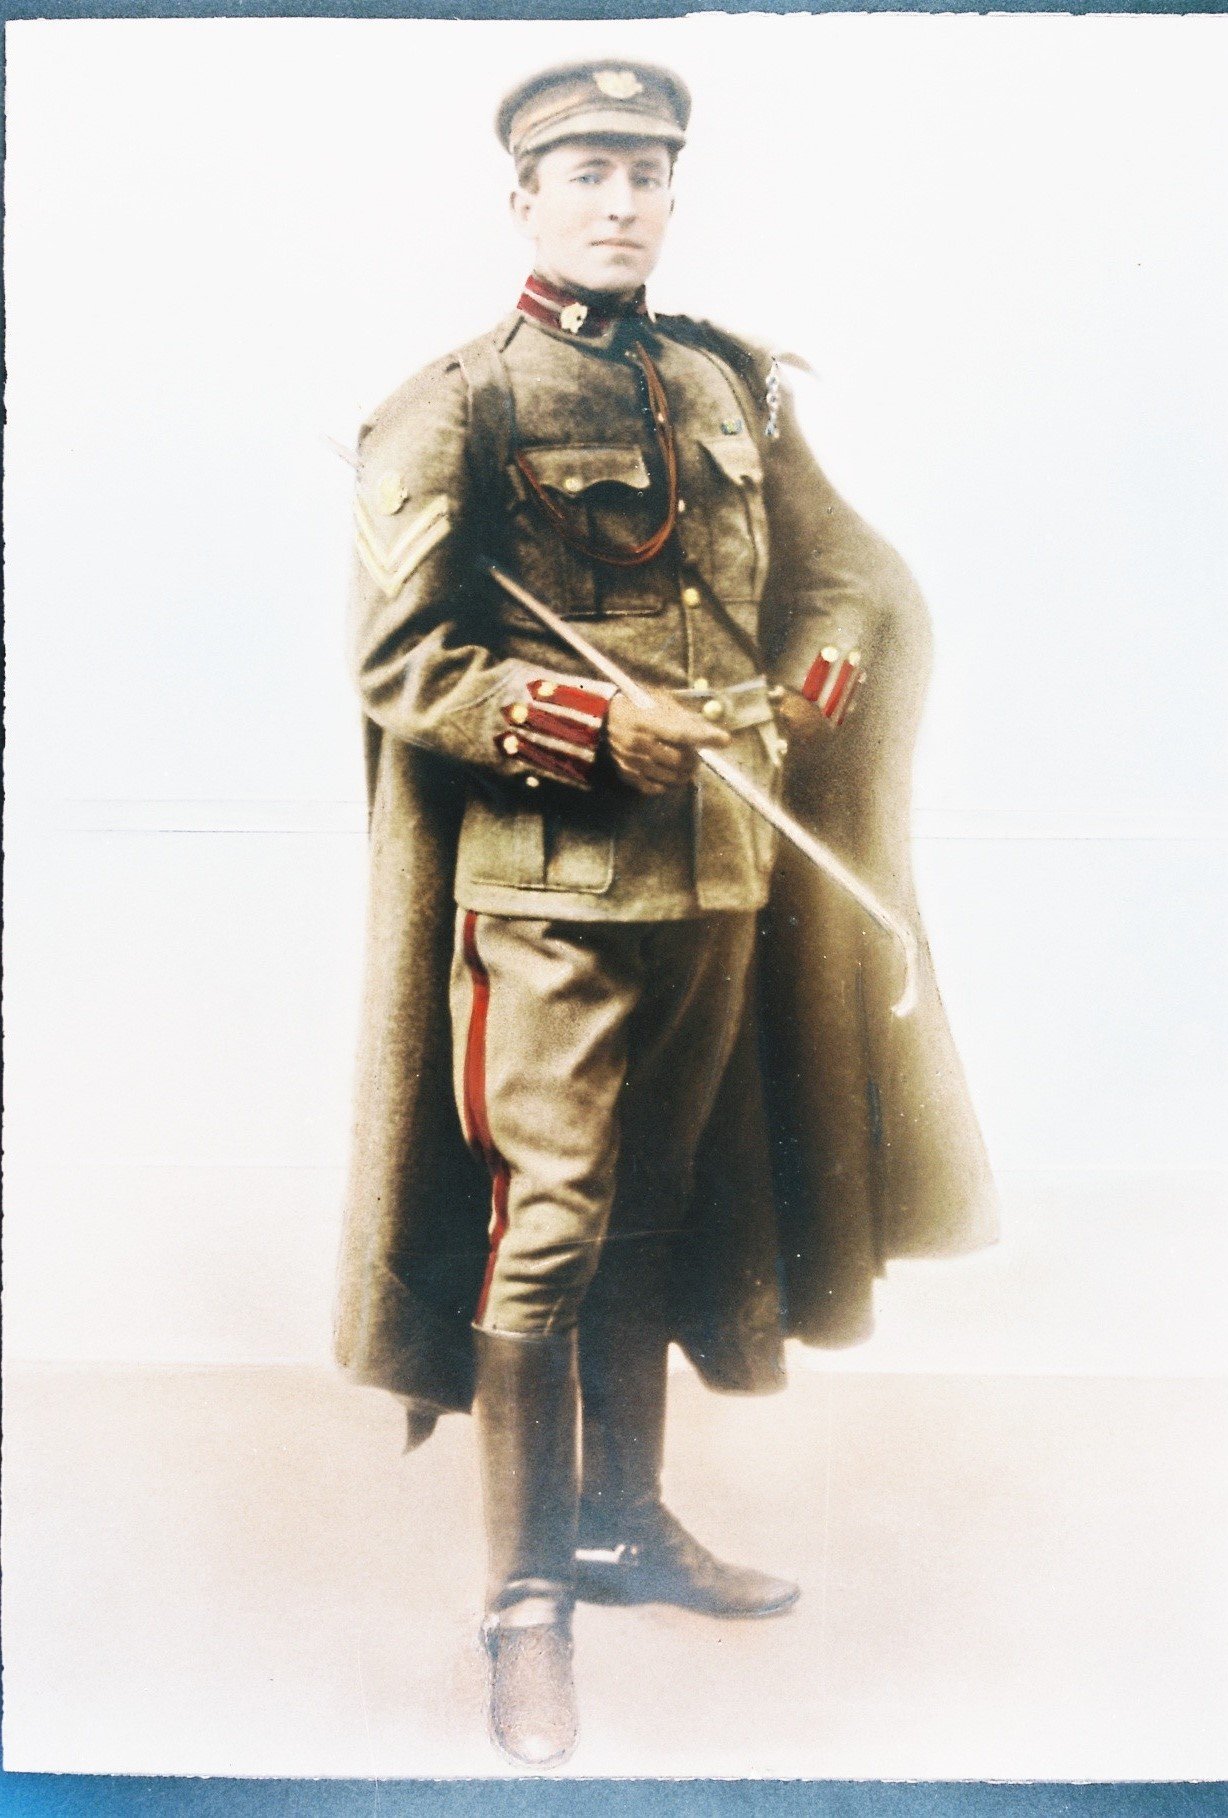 Photograph of Corporal Herbert Harris Shaw of ‘C’ Squadron (Australasian) of the 4th County of London (King’s Colonials) Imperial Yeomanry in Undress uniform showing the khaki forage cap with ‘C’ Squadron (Australasian) headdress badge and first pattern Regimental collar badges circa 1905 (Peter Nemaric collection).